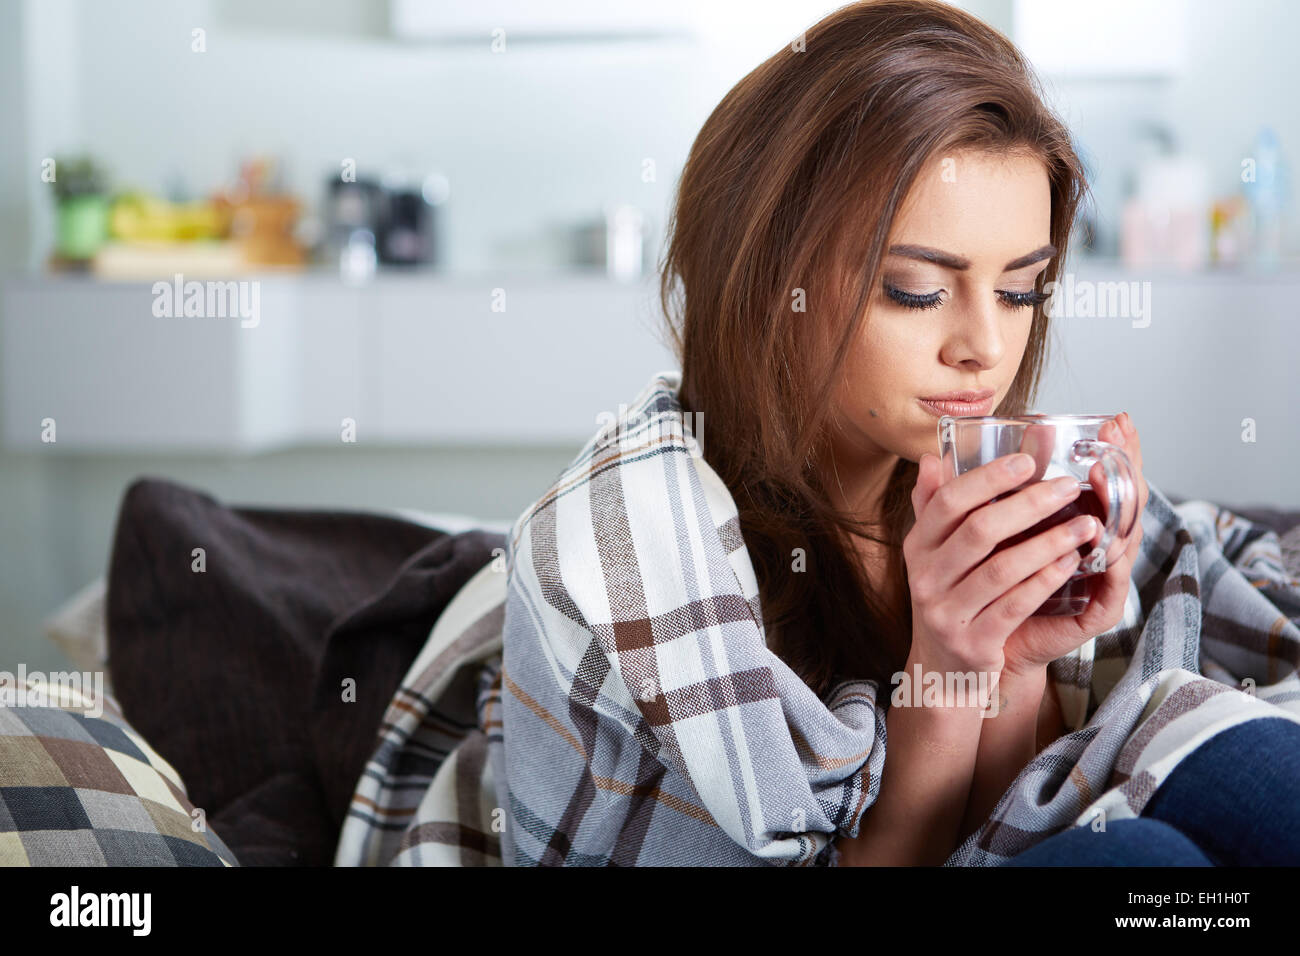 young woman caught a cold Stock Photo